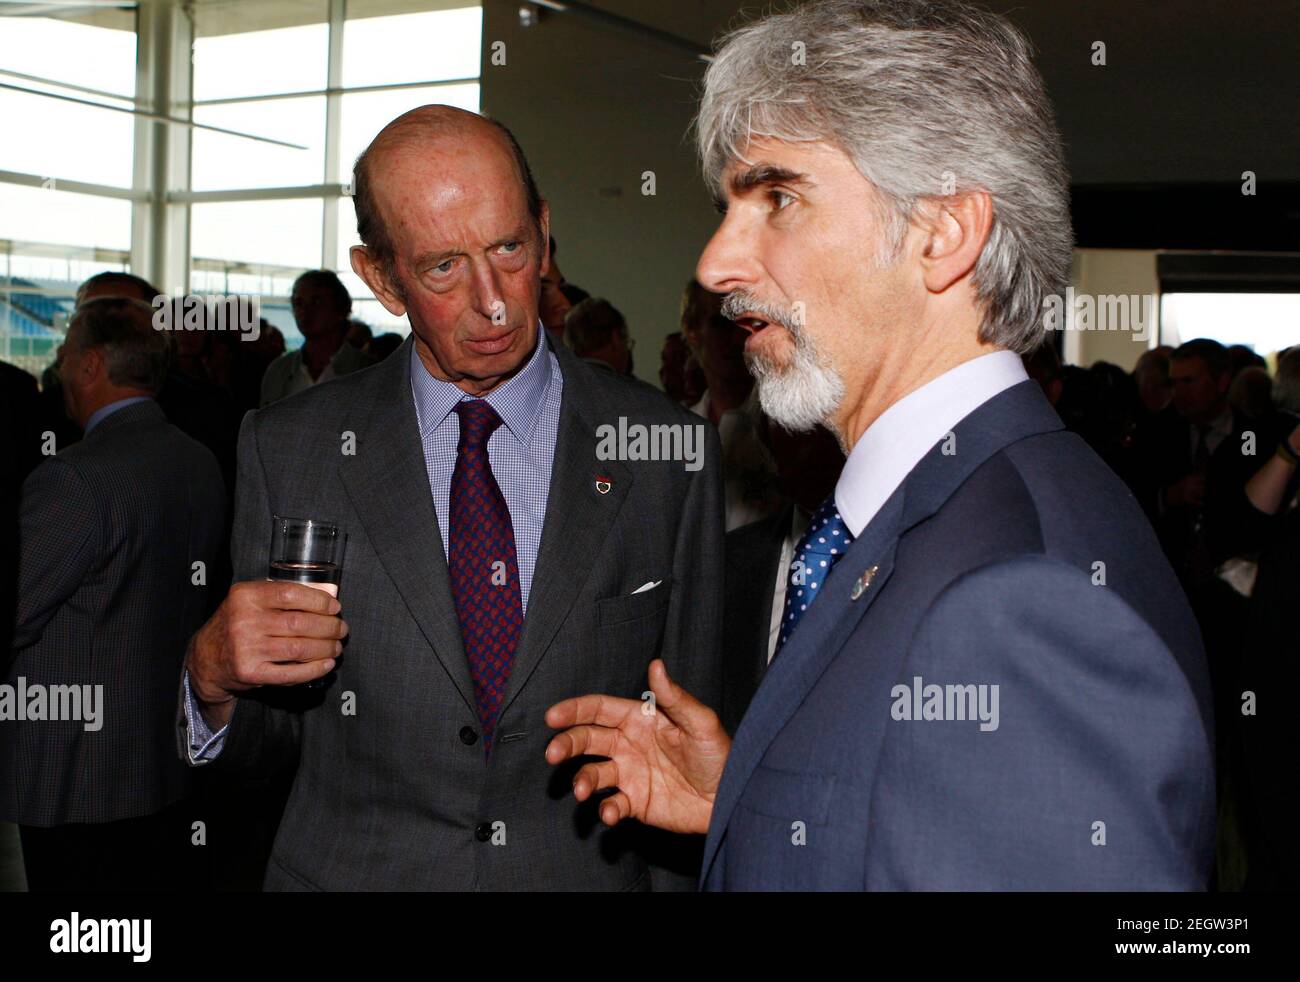 Formula One - F1 - Official launch of The Silverstone Wing  - The Silverstone Wing, Silverstone Circuit, Northamptonshire, NN12 8TN  - 17/5/11  HRH Duke of Kent and Former Formula One Driver Damon Hill (R) before the opening ceremony  Mandatory Credit: Action Images / Peter Cziborra  Livepic Stock Photo